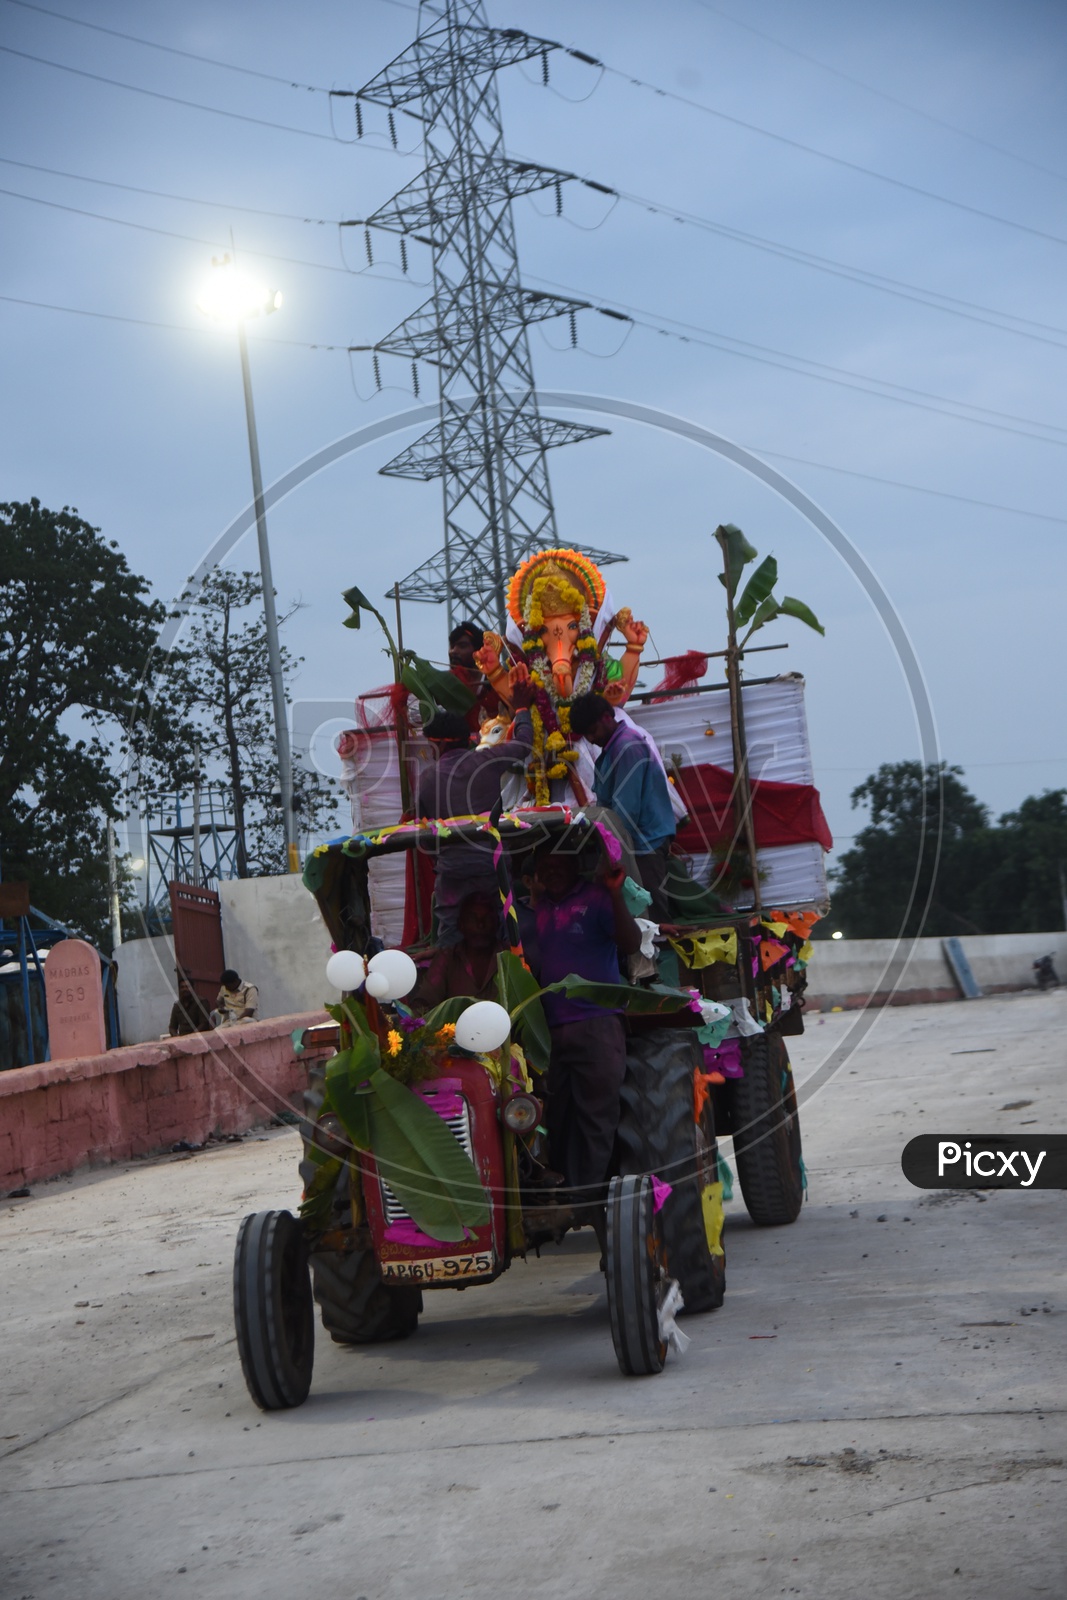 Ganesha Idol being carried on the tractor